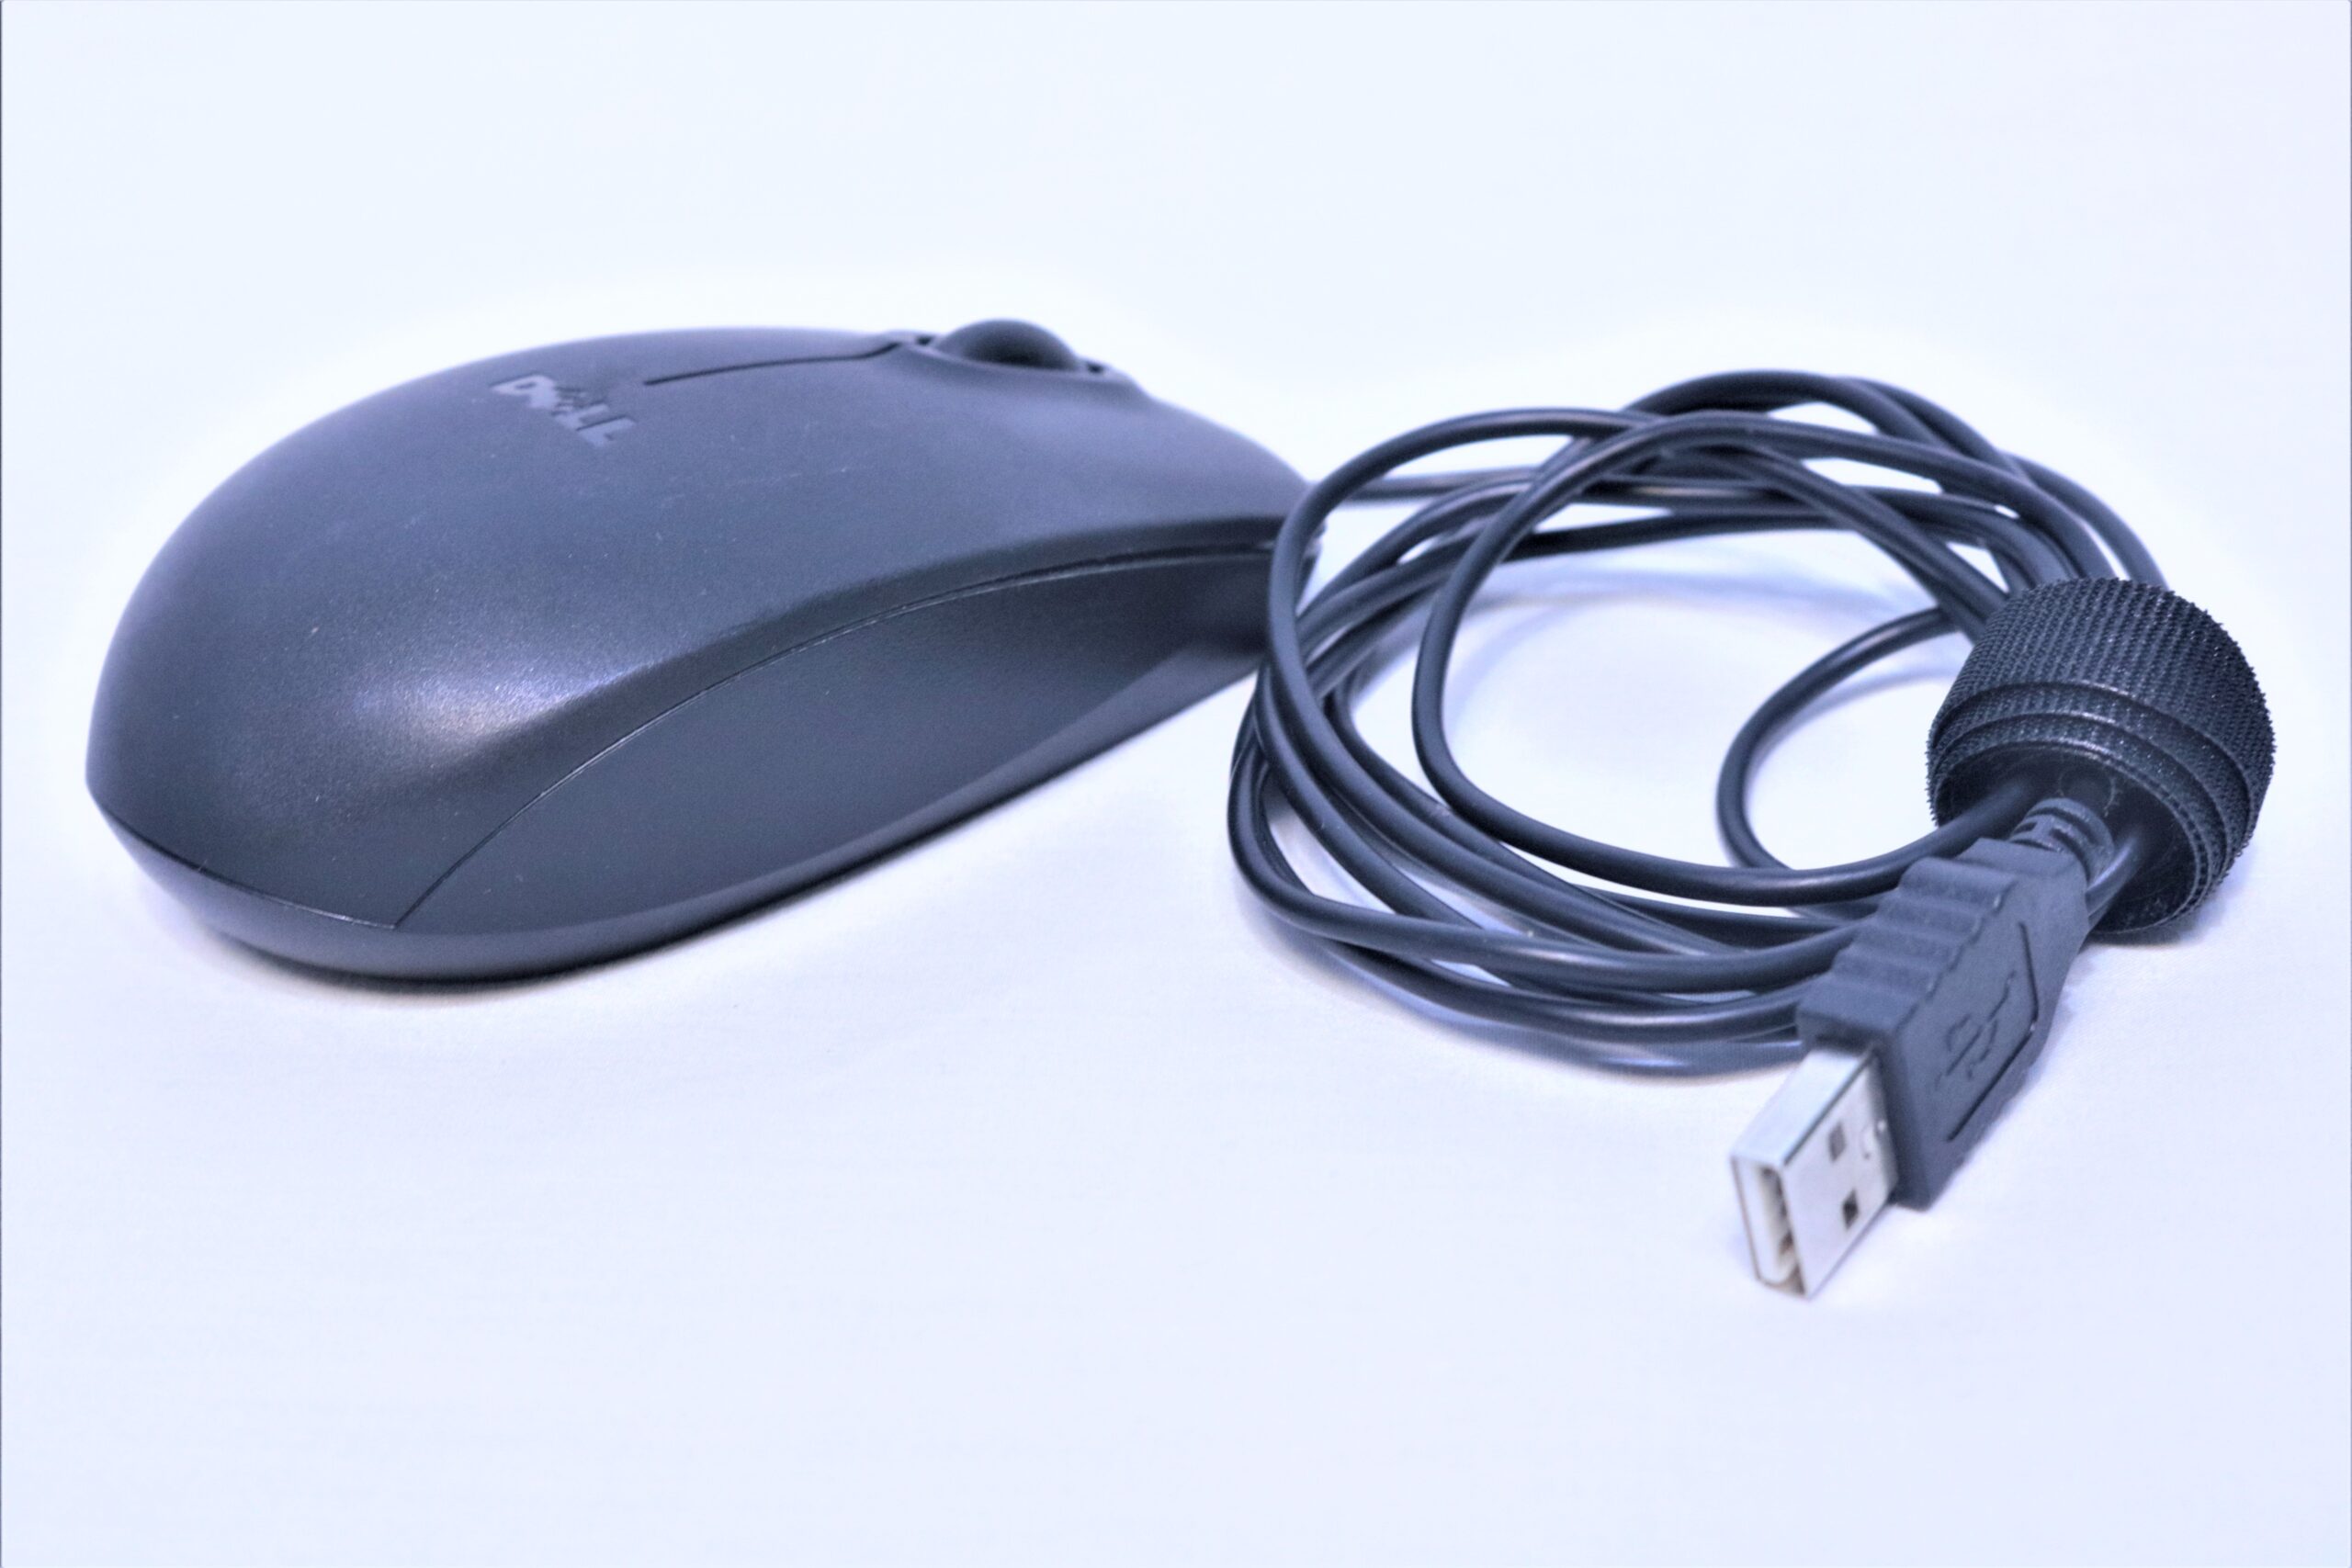 Dell Optical USB Mouse